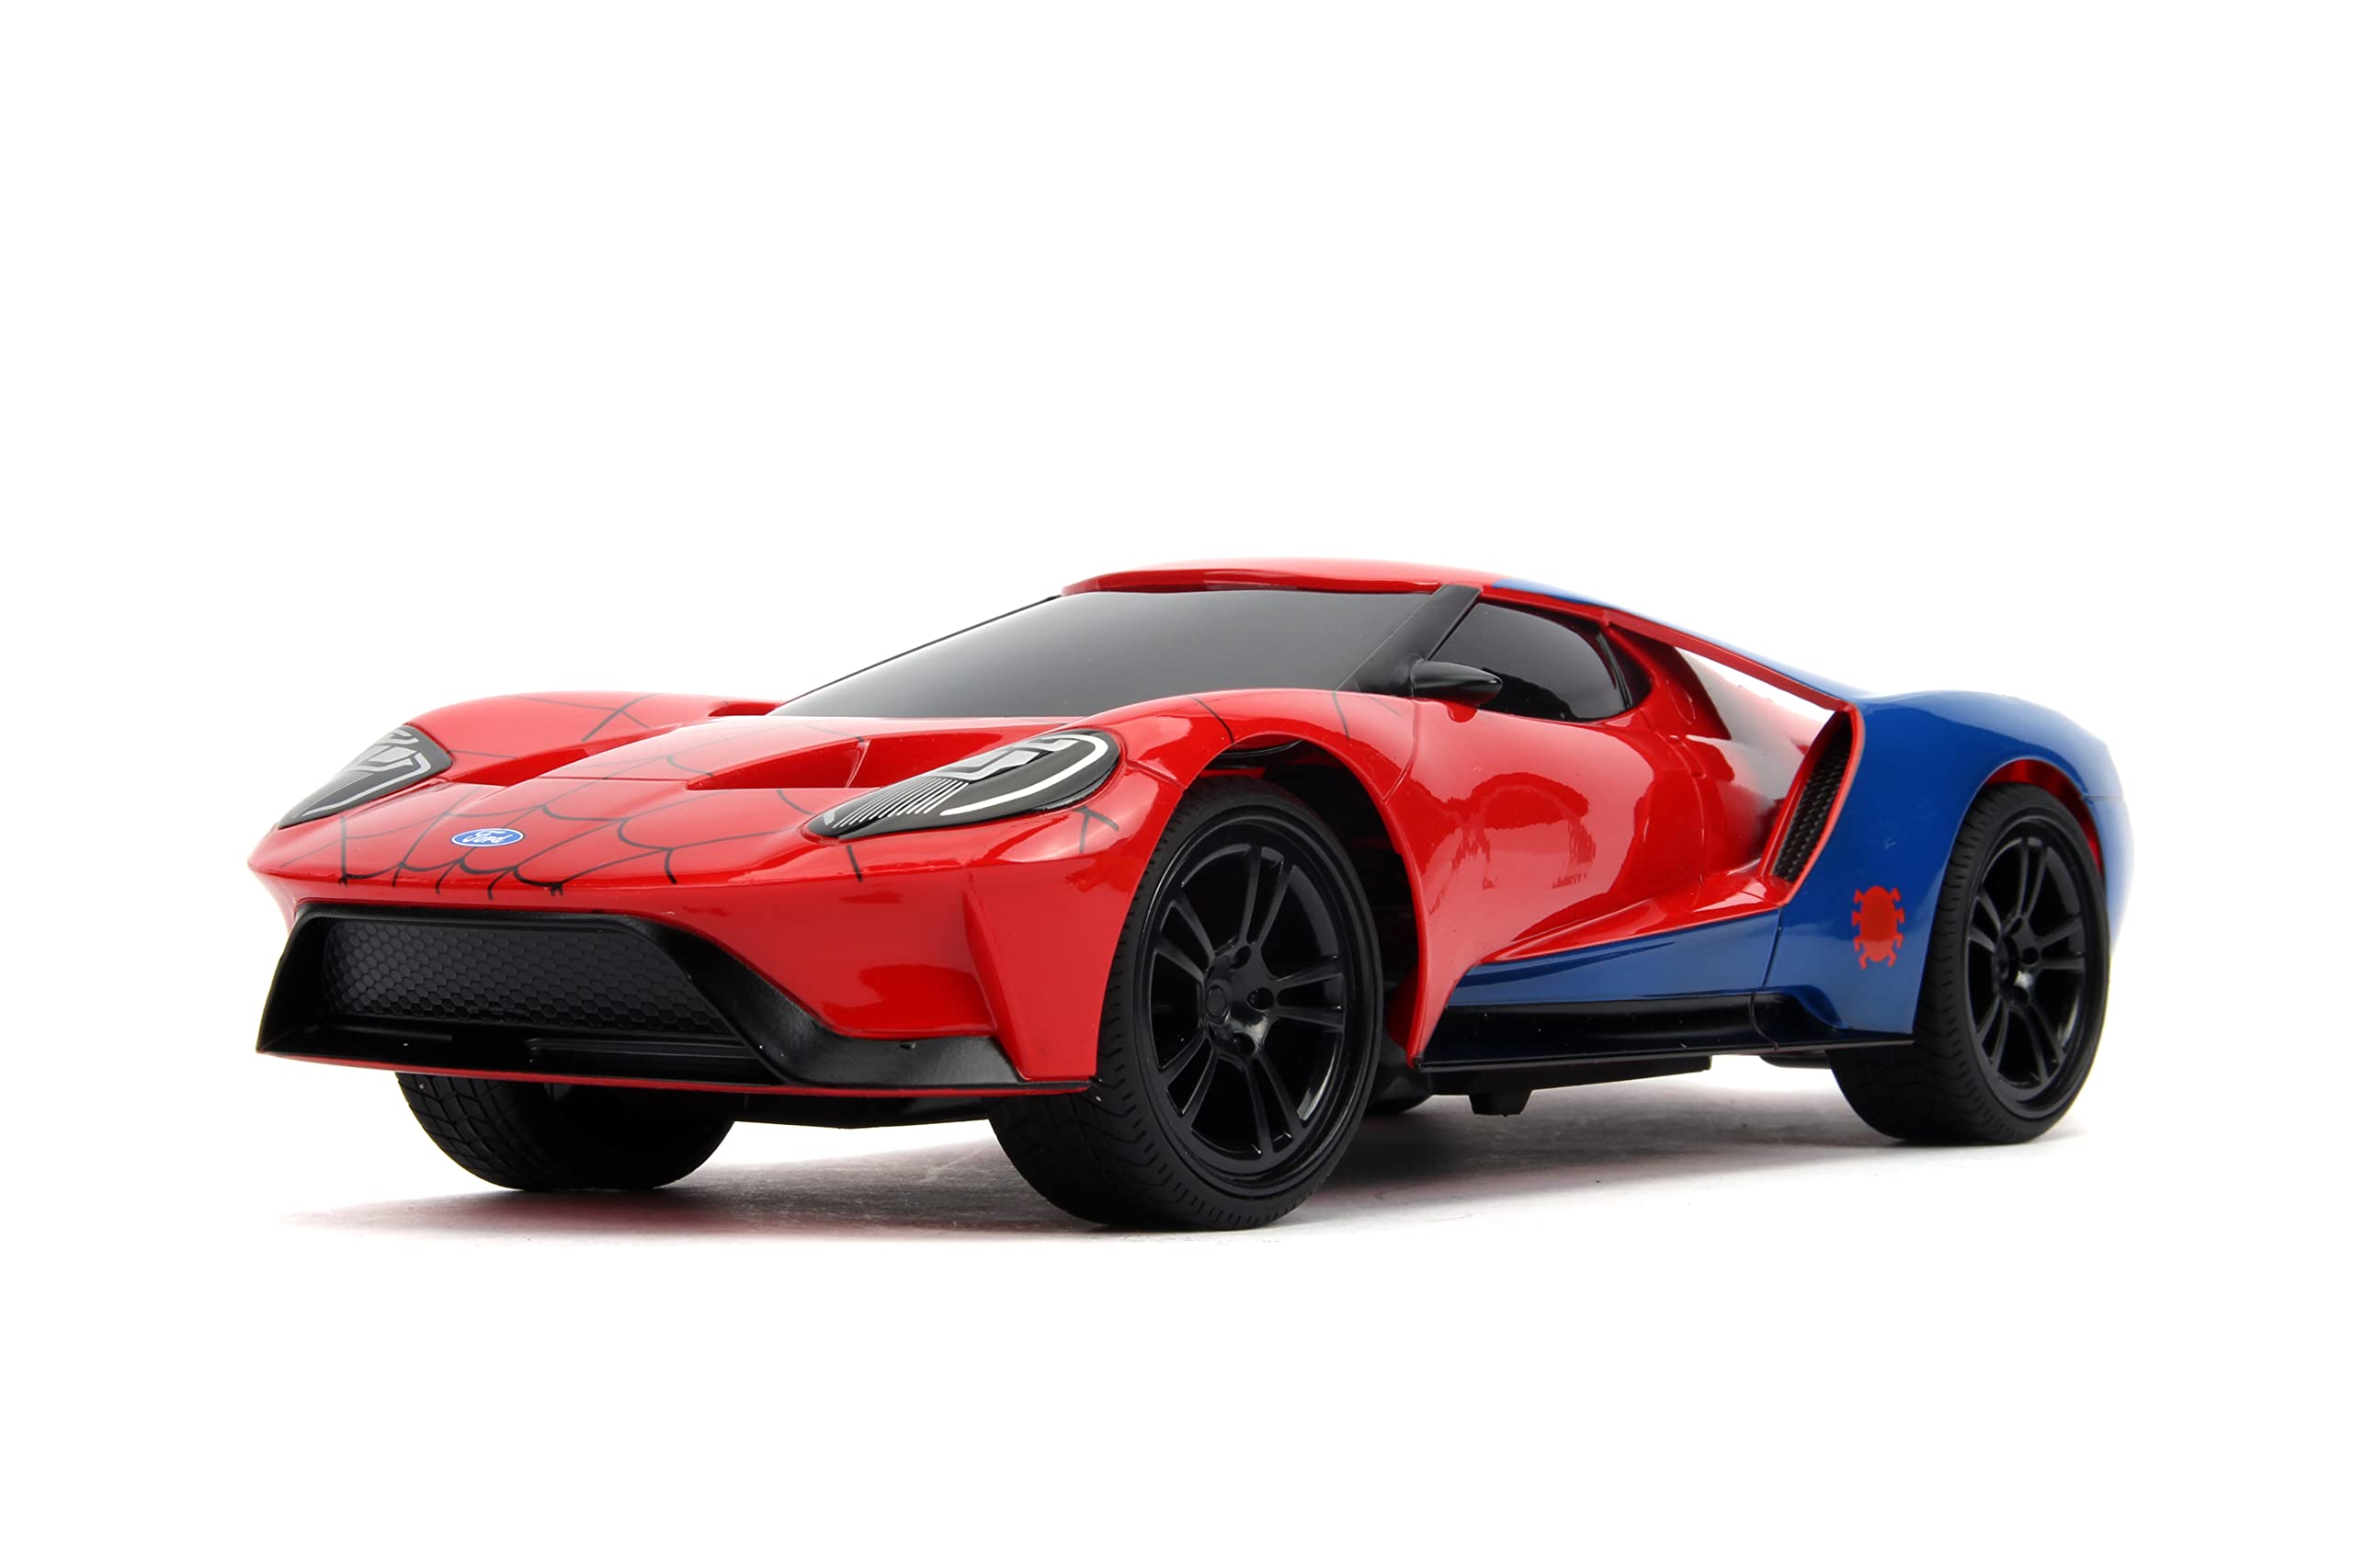 Marvel Spider-Man 1:16 2017 Ford GT RC Radio Control Cars, Toys for Kids and Adults